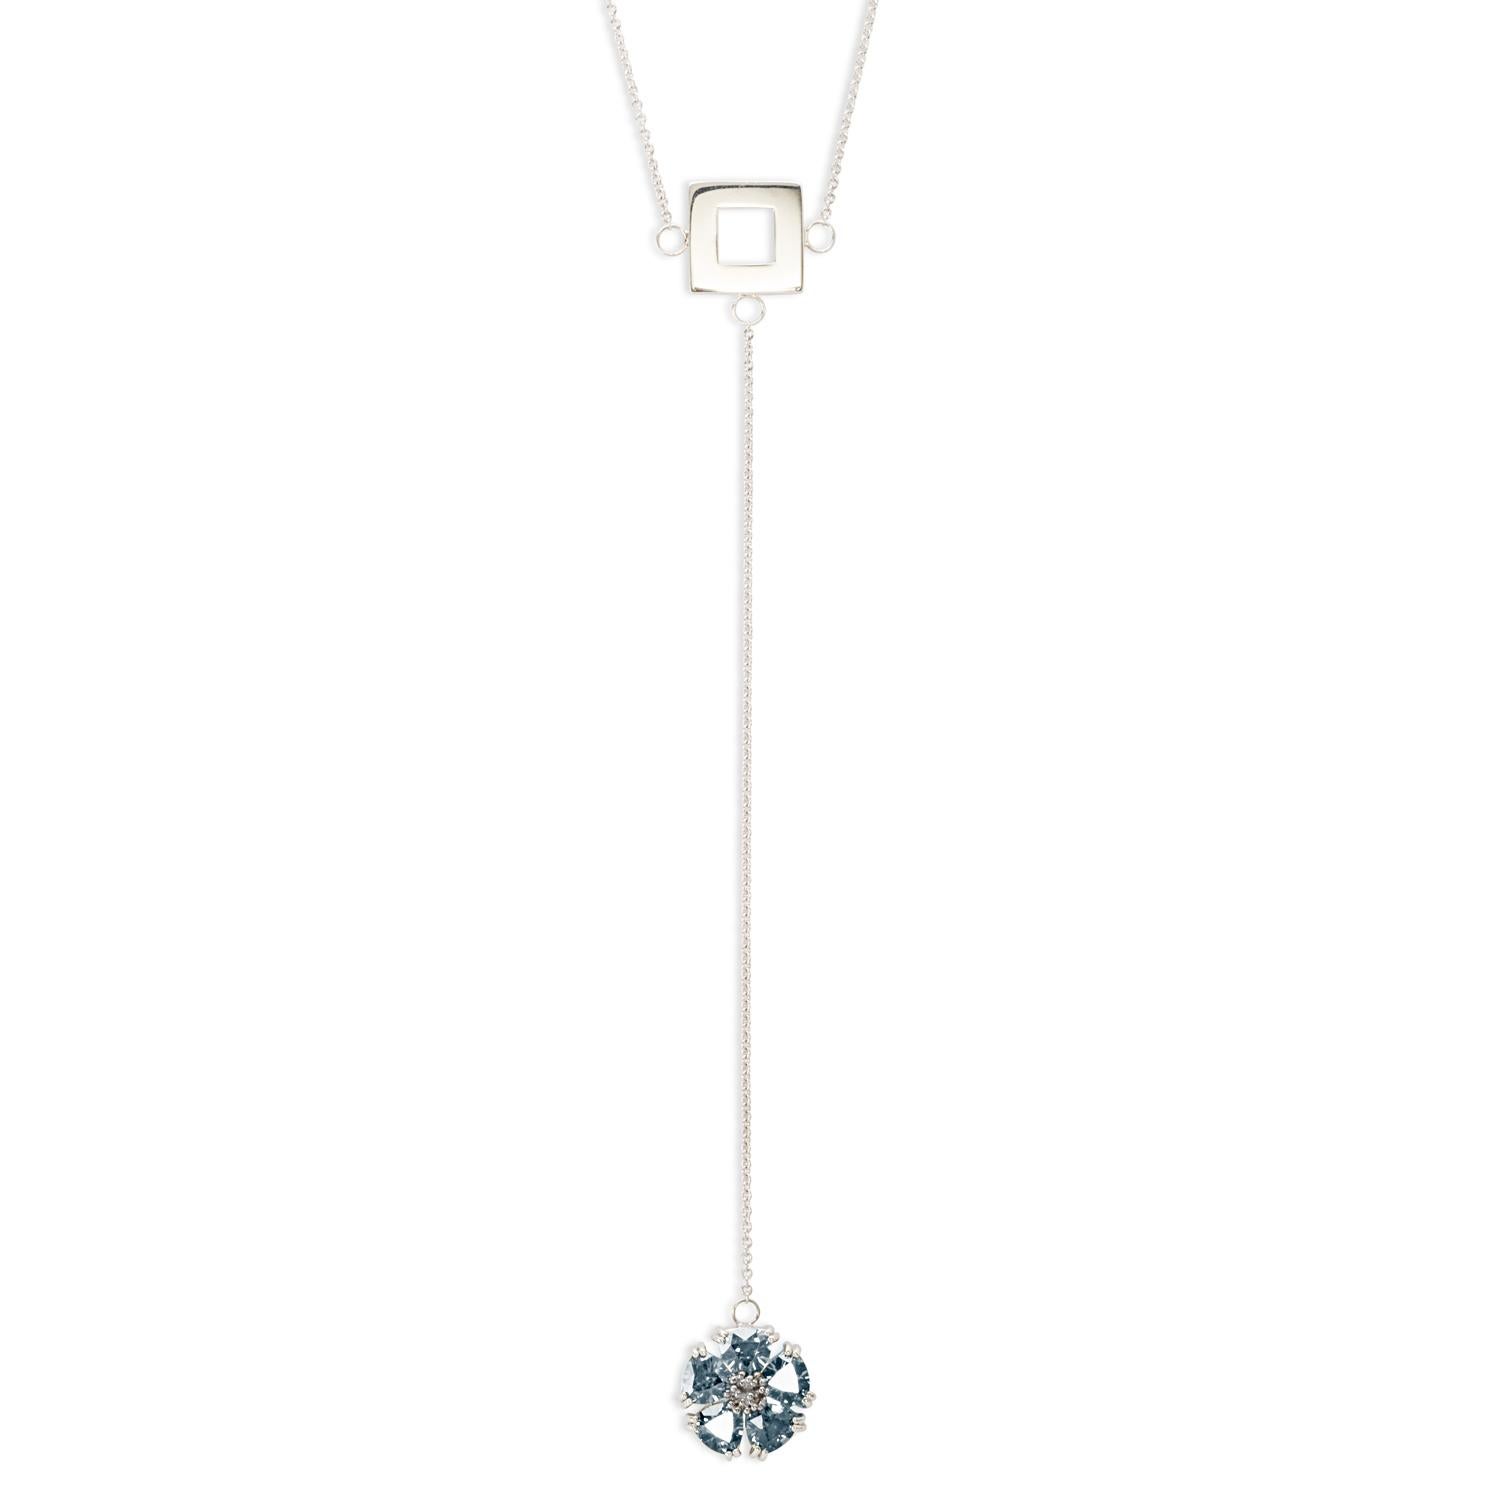 Designed in NYC

.925 Sterling Silver 5 x 7 mm Dark Blue Topaz Blossom Stone and Square Lariat Necklace. No matter the season, allow natural beauty to surround you wherever you go. Blossom stone and square lariat necklace: 

Sterling silver